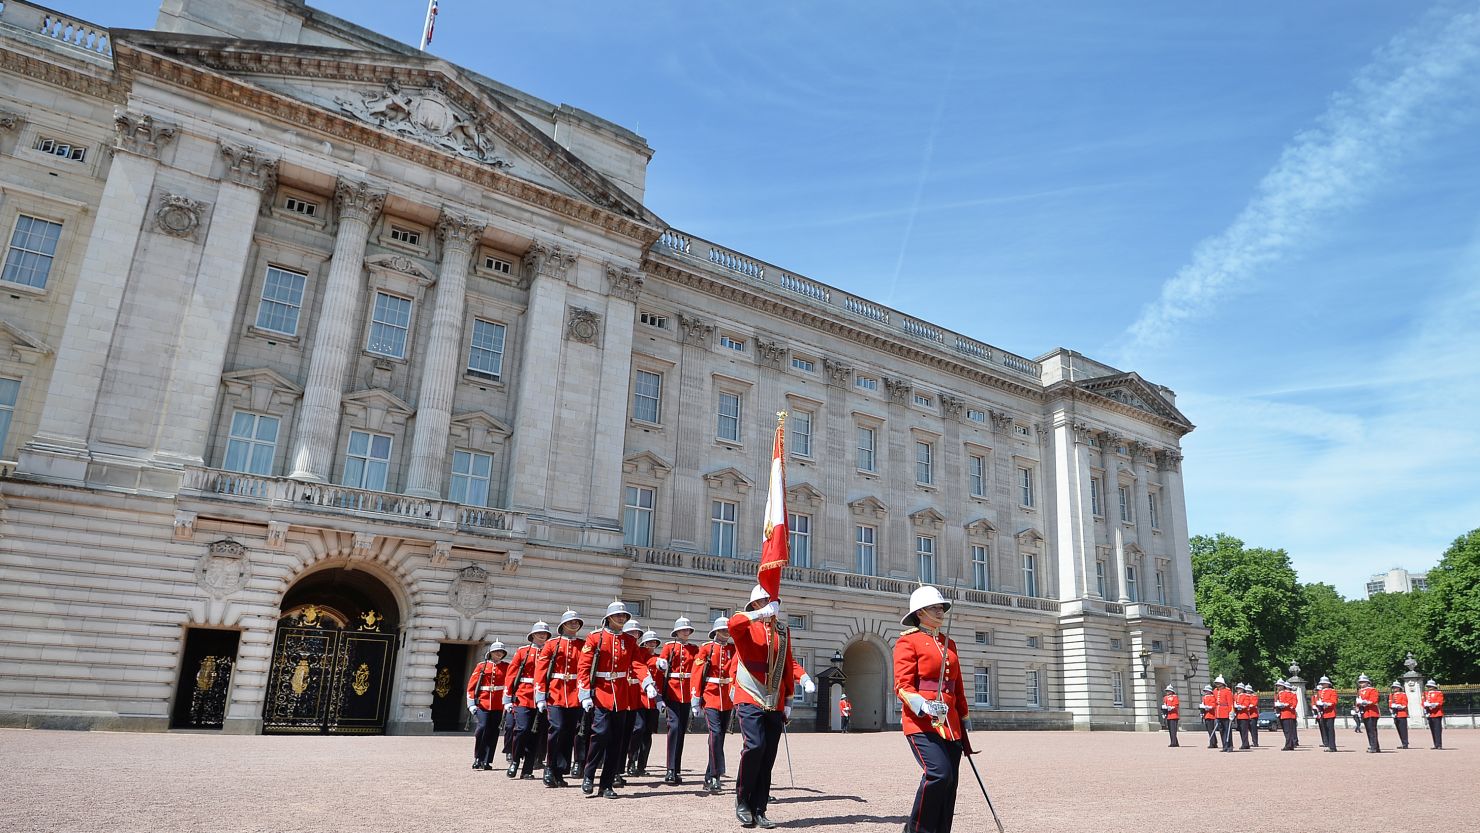 Captain Megan Couto, front, makes history as she becomes the first female to command the Queen's Guard at Buckingham Palace on June 26, 2017.